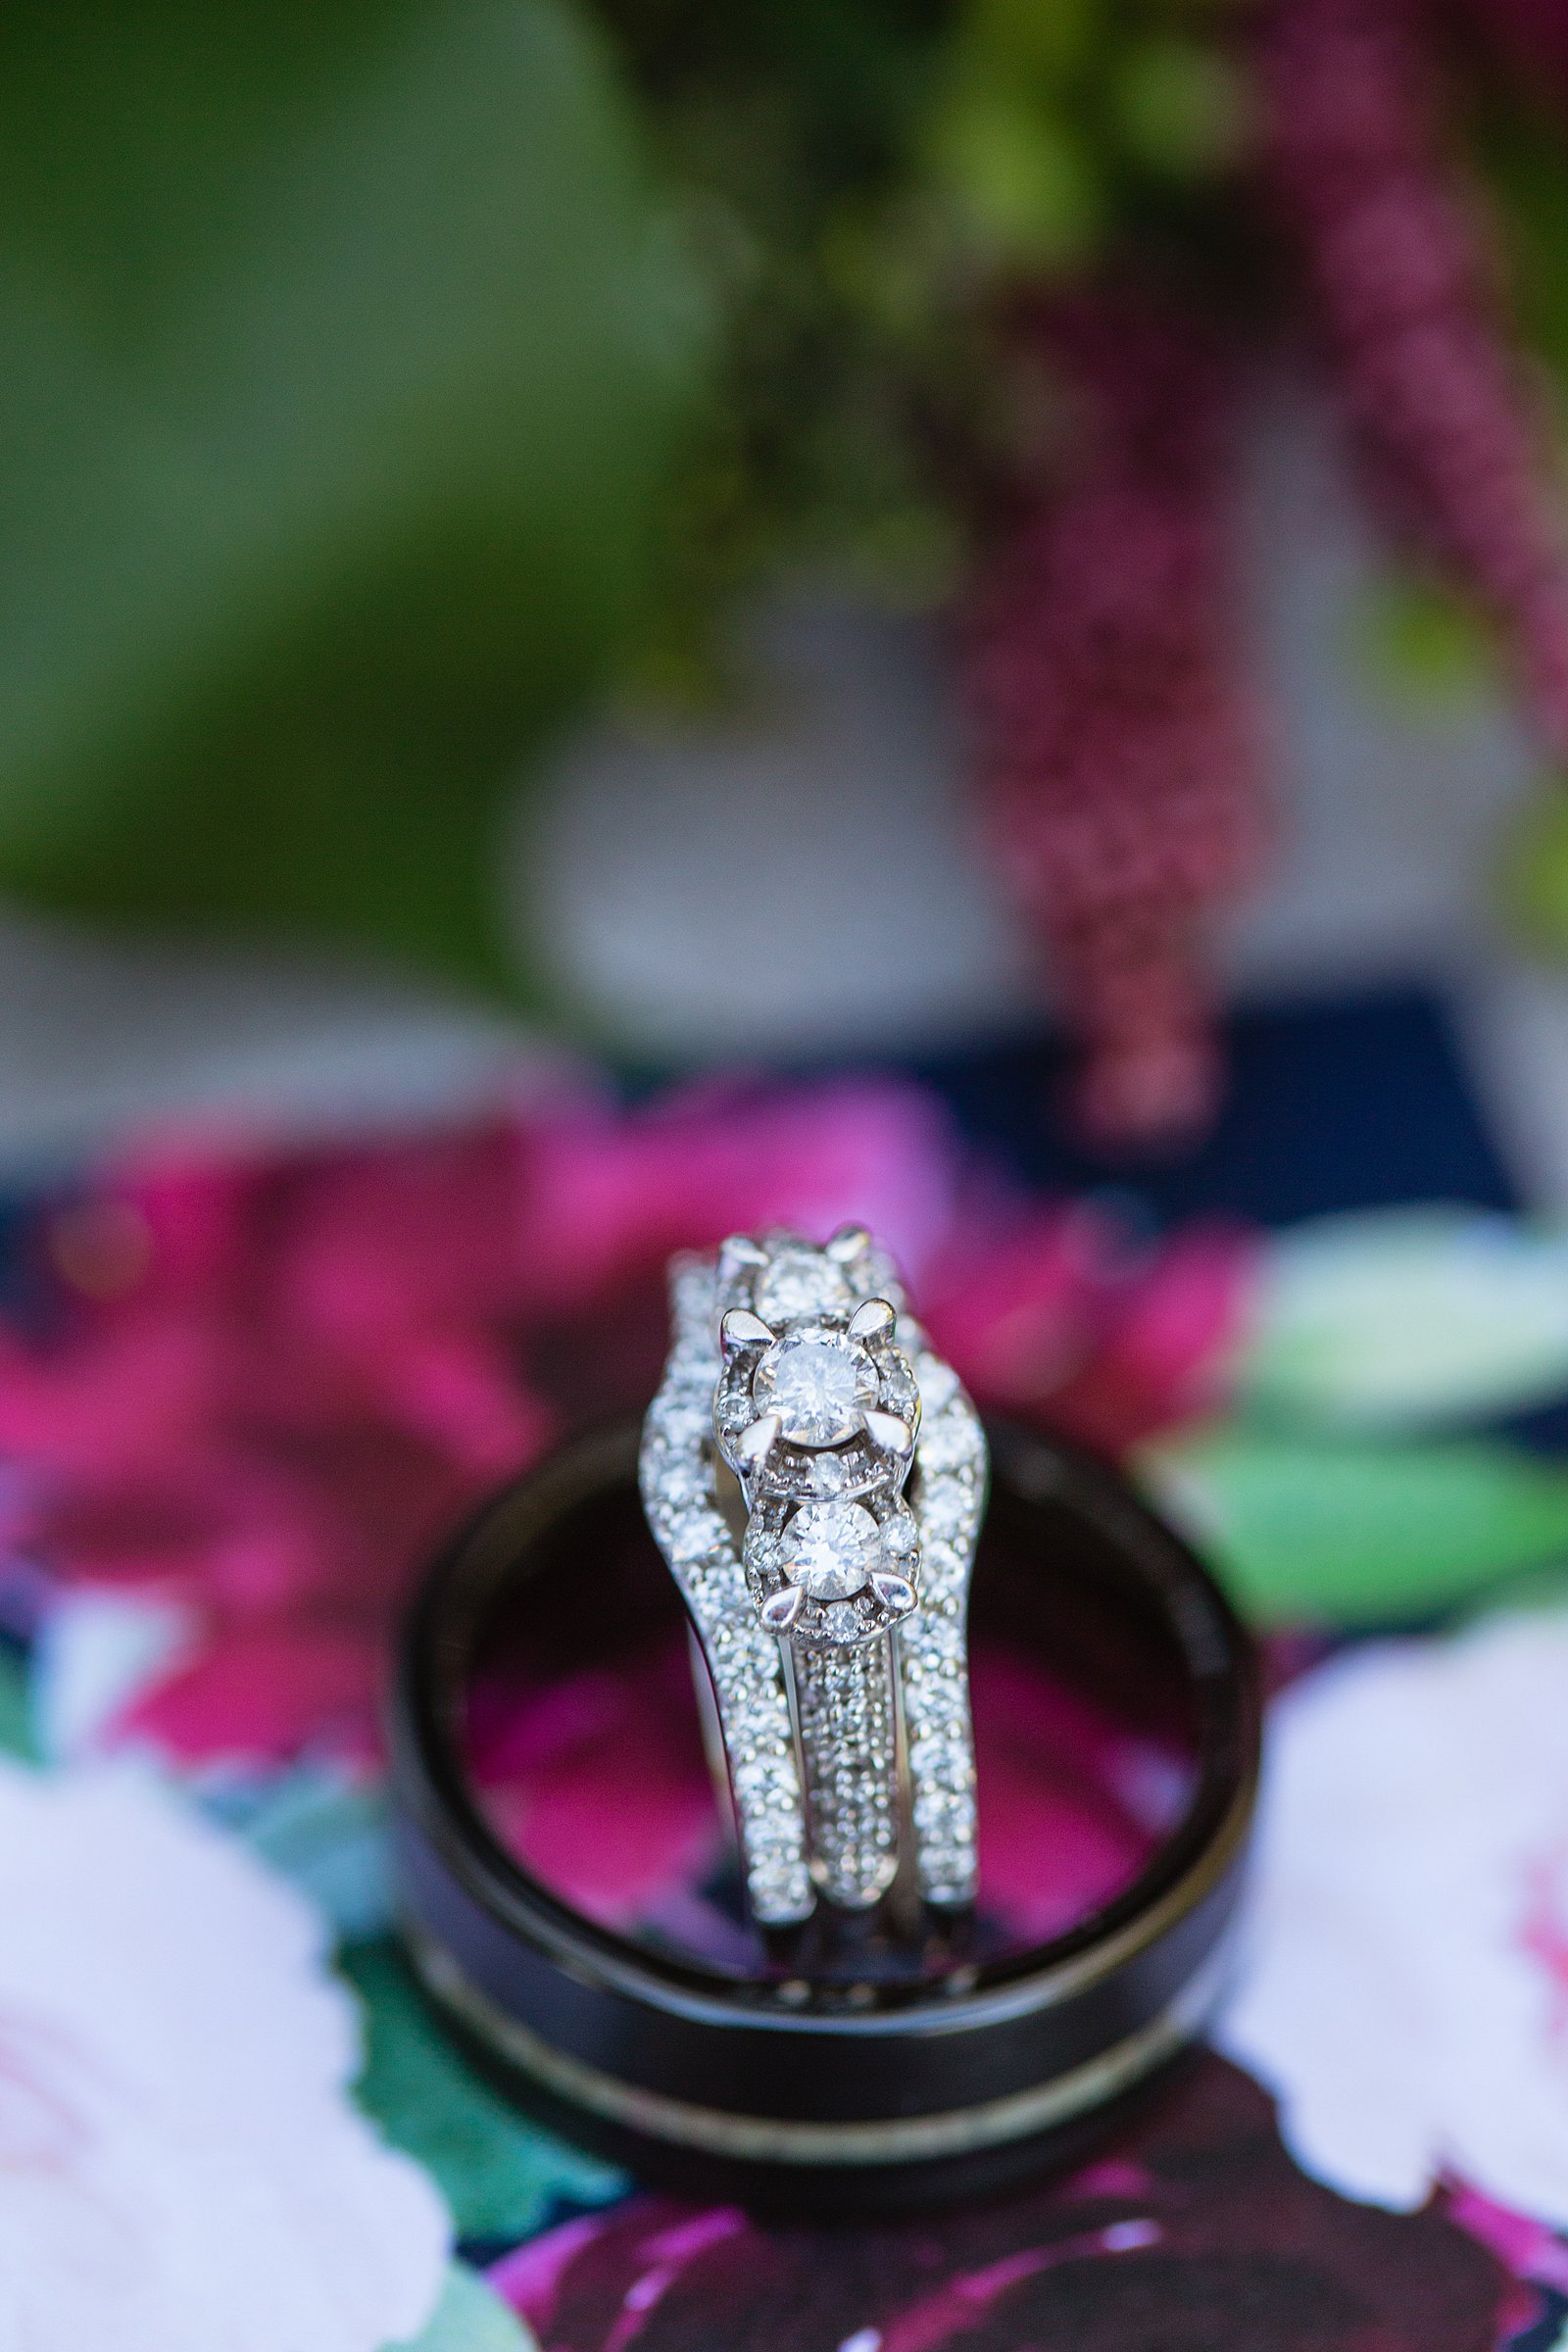 White gold and diamond bride's wedding ring by PMA Photography.